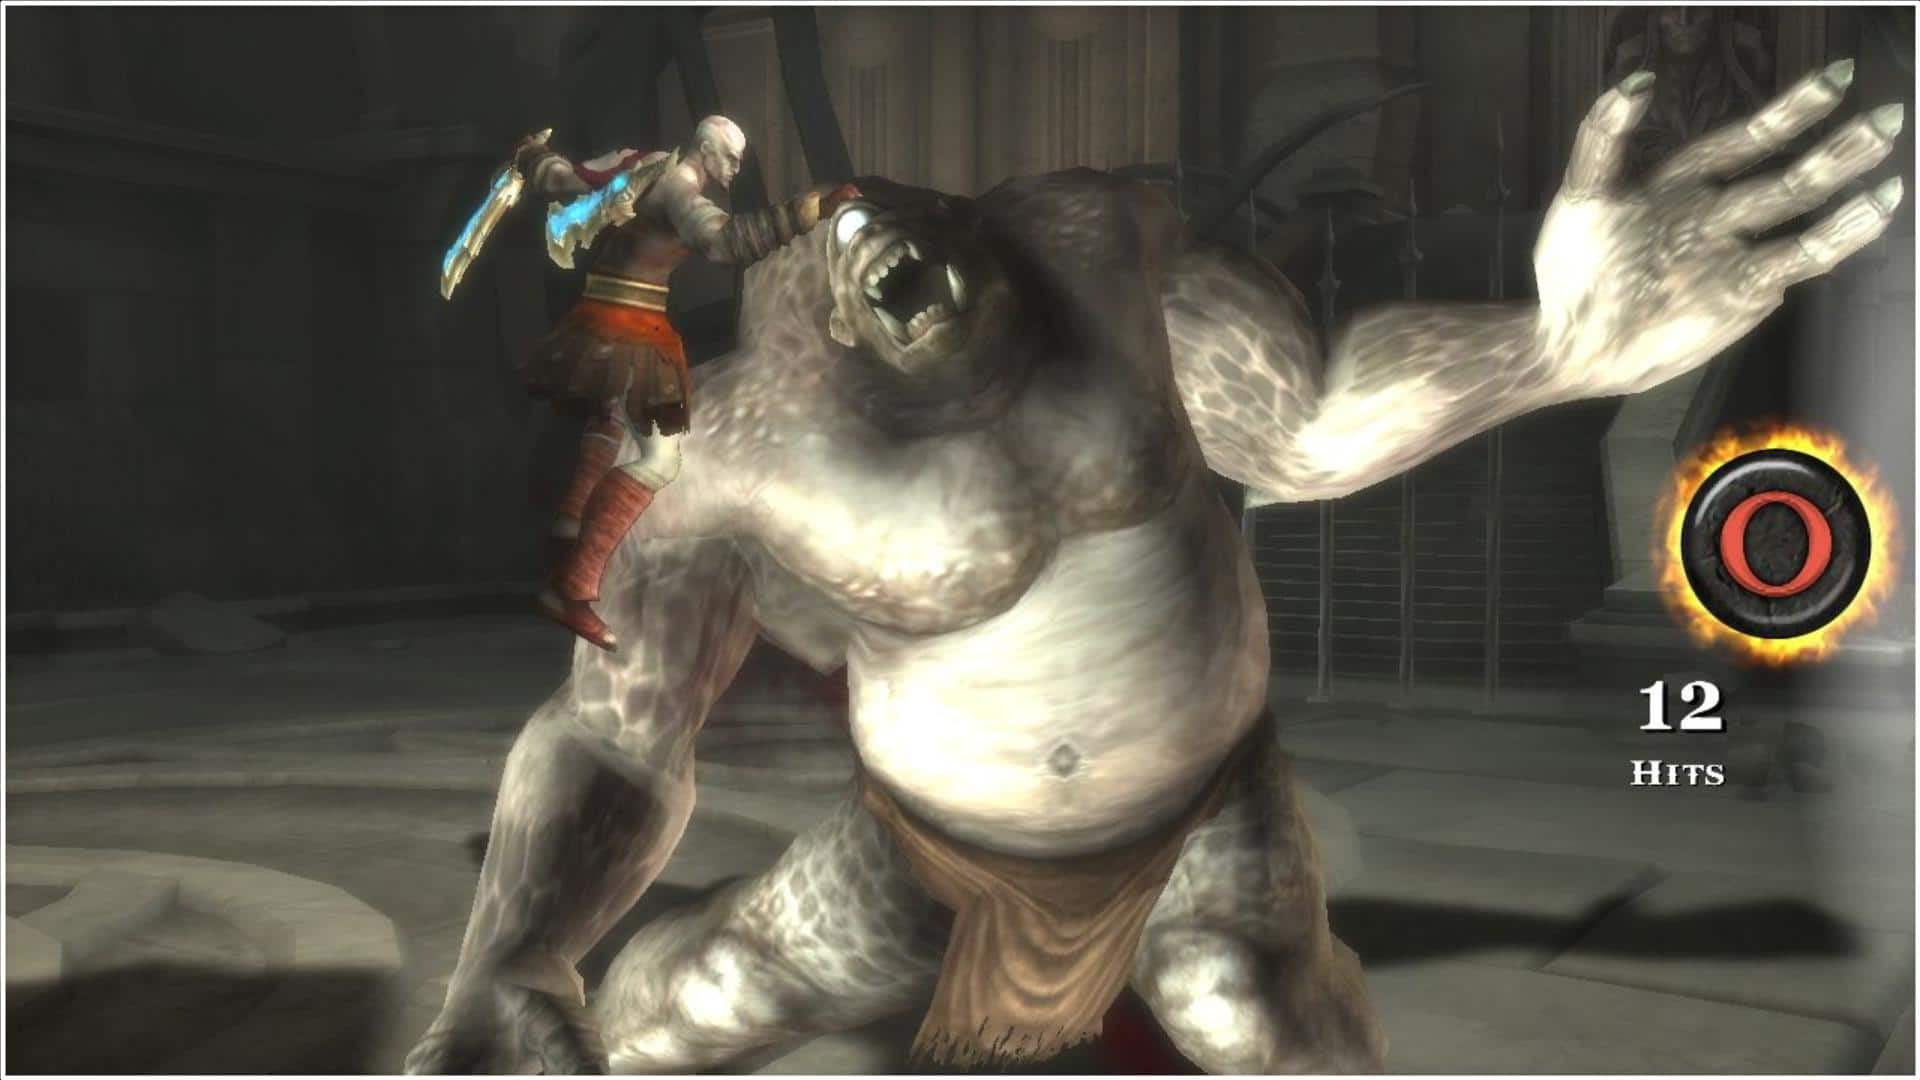 God of War: Ghost of Sparta ROM & ISO - PSP Game Download